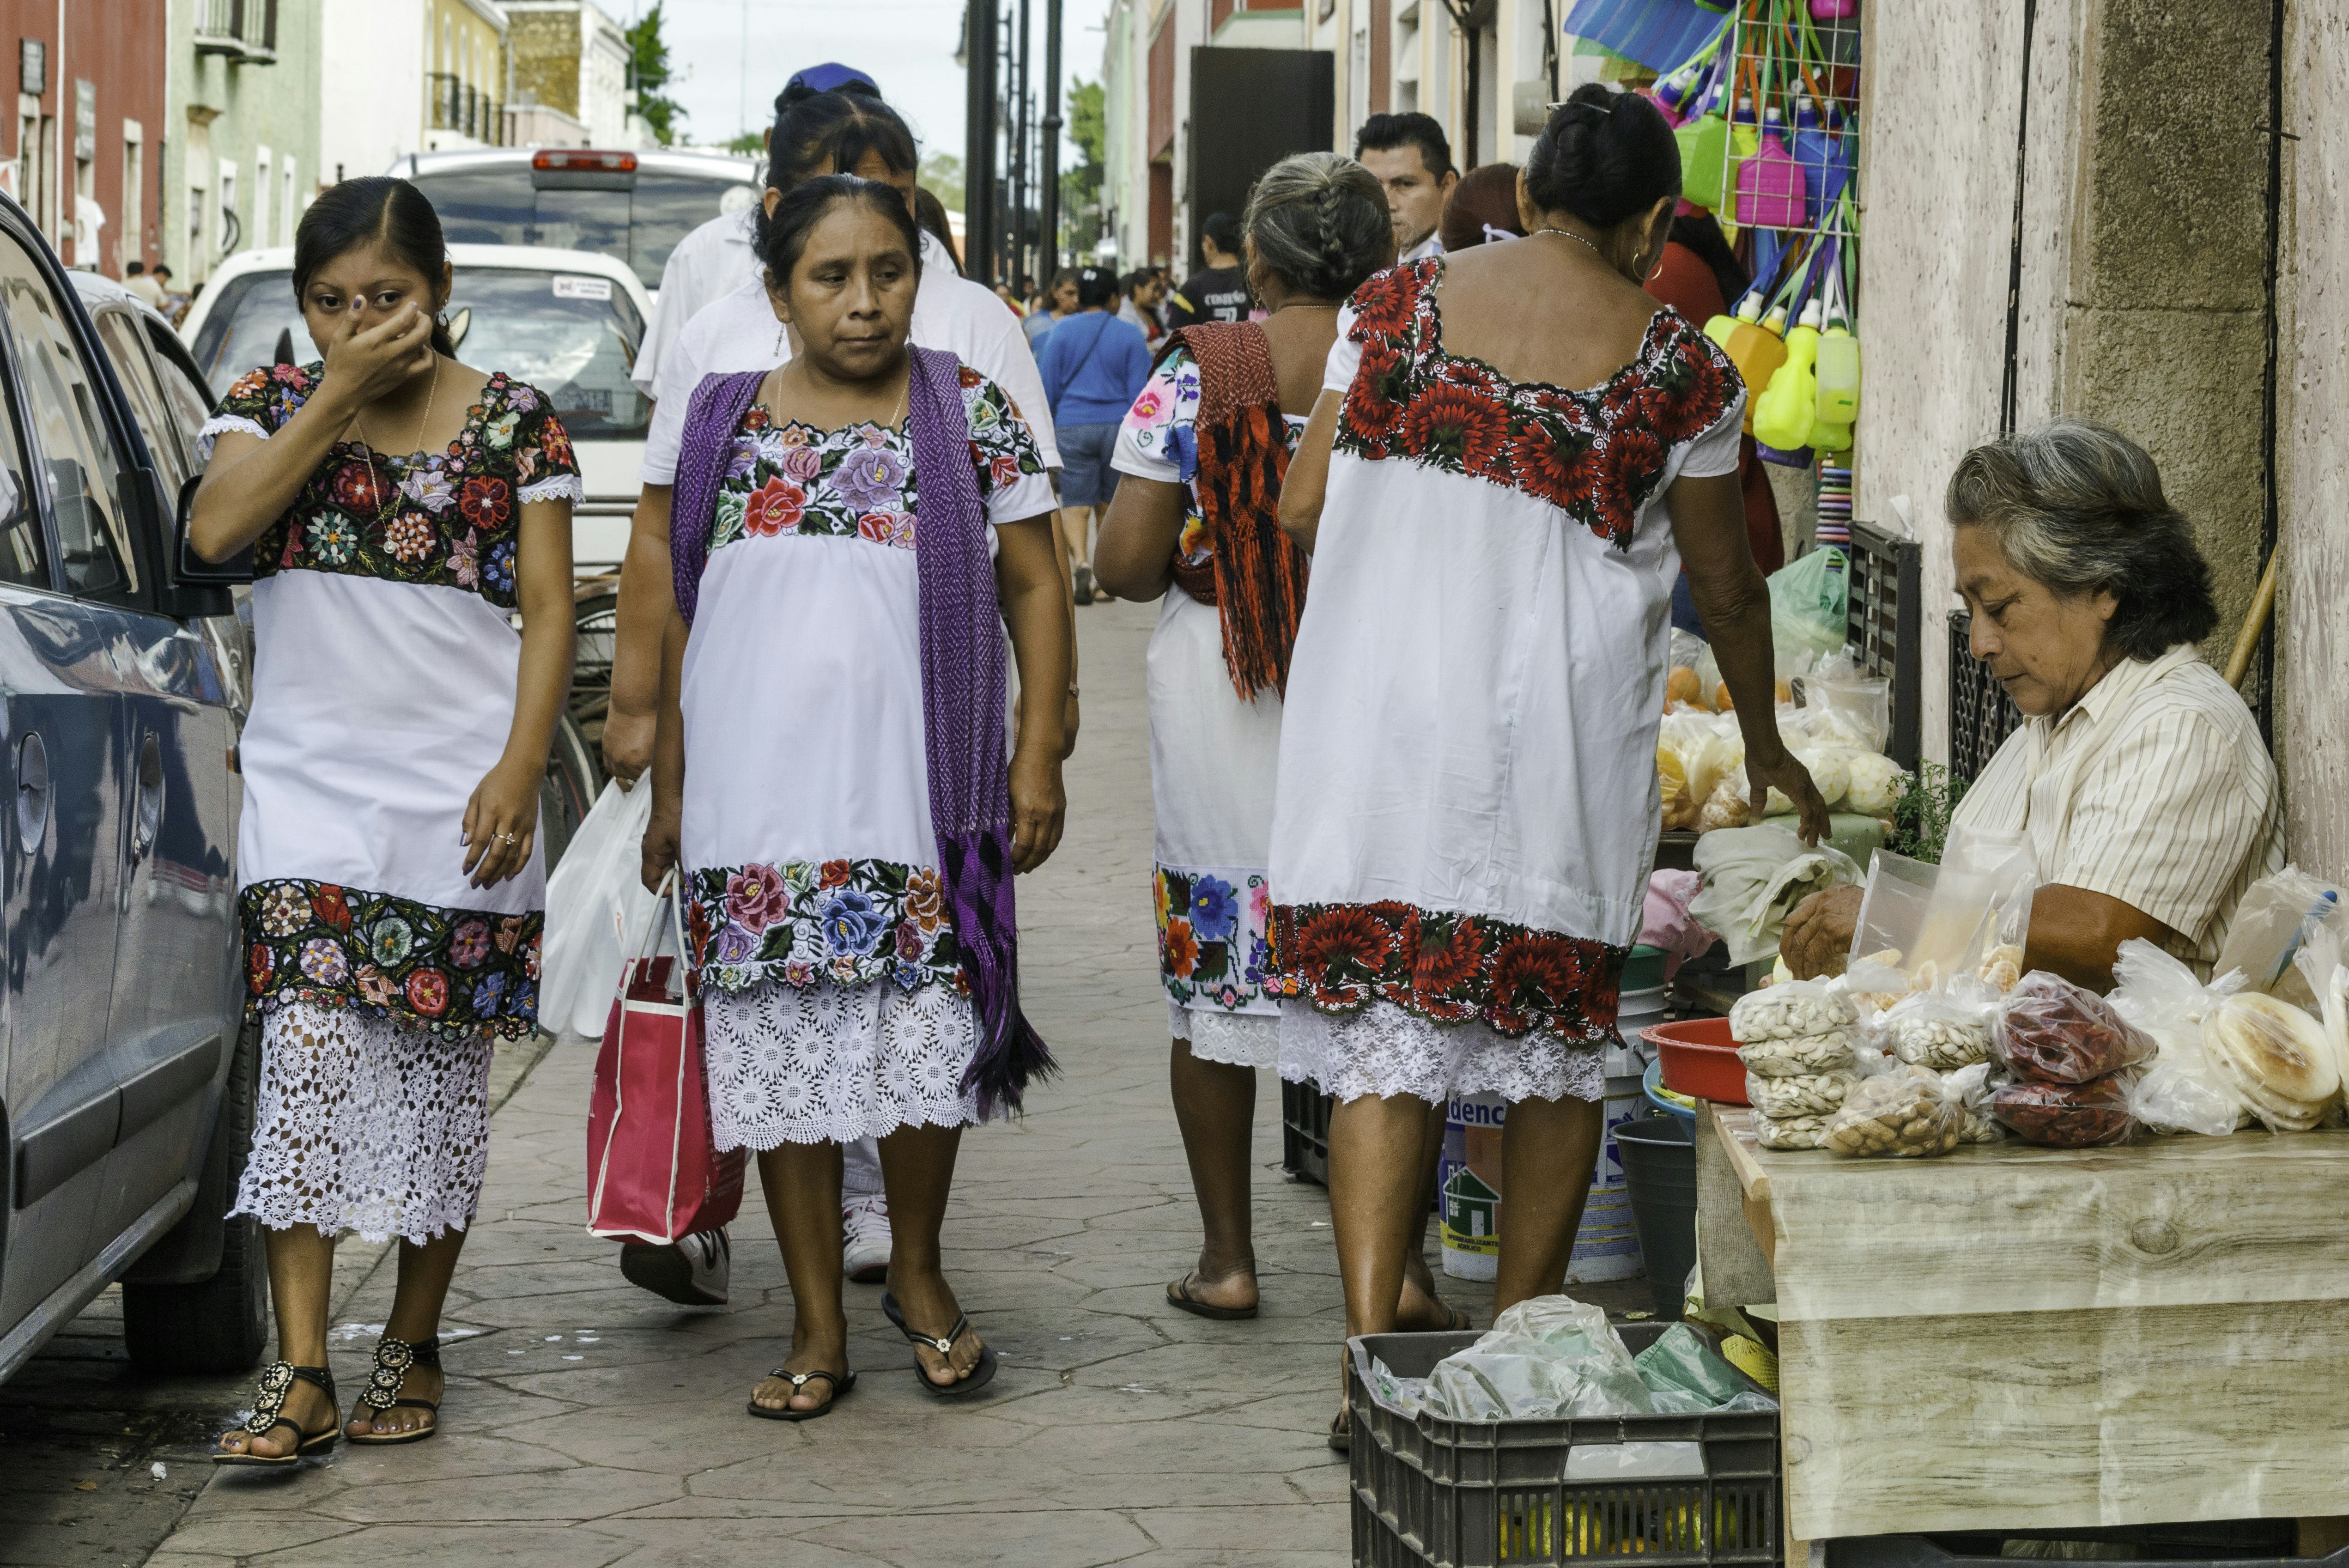 Women wearing huipiles, traditional hand-embroided Mayan dress, at Calle 44 in Valladolid, Yucatan state, Mexico.